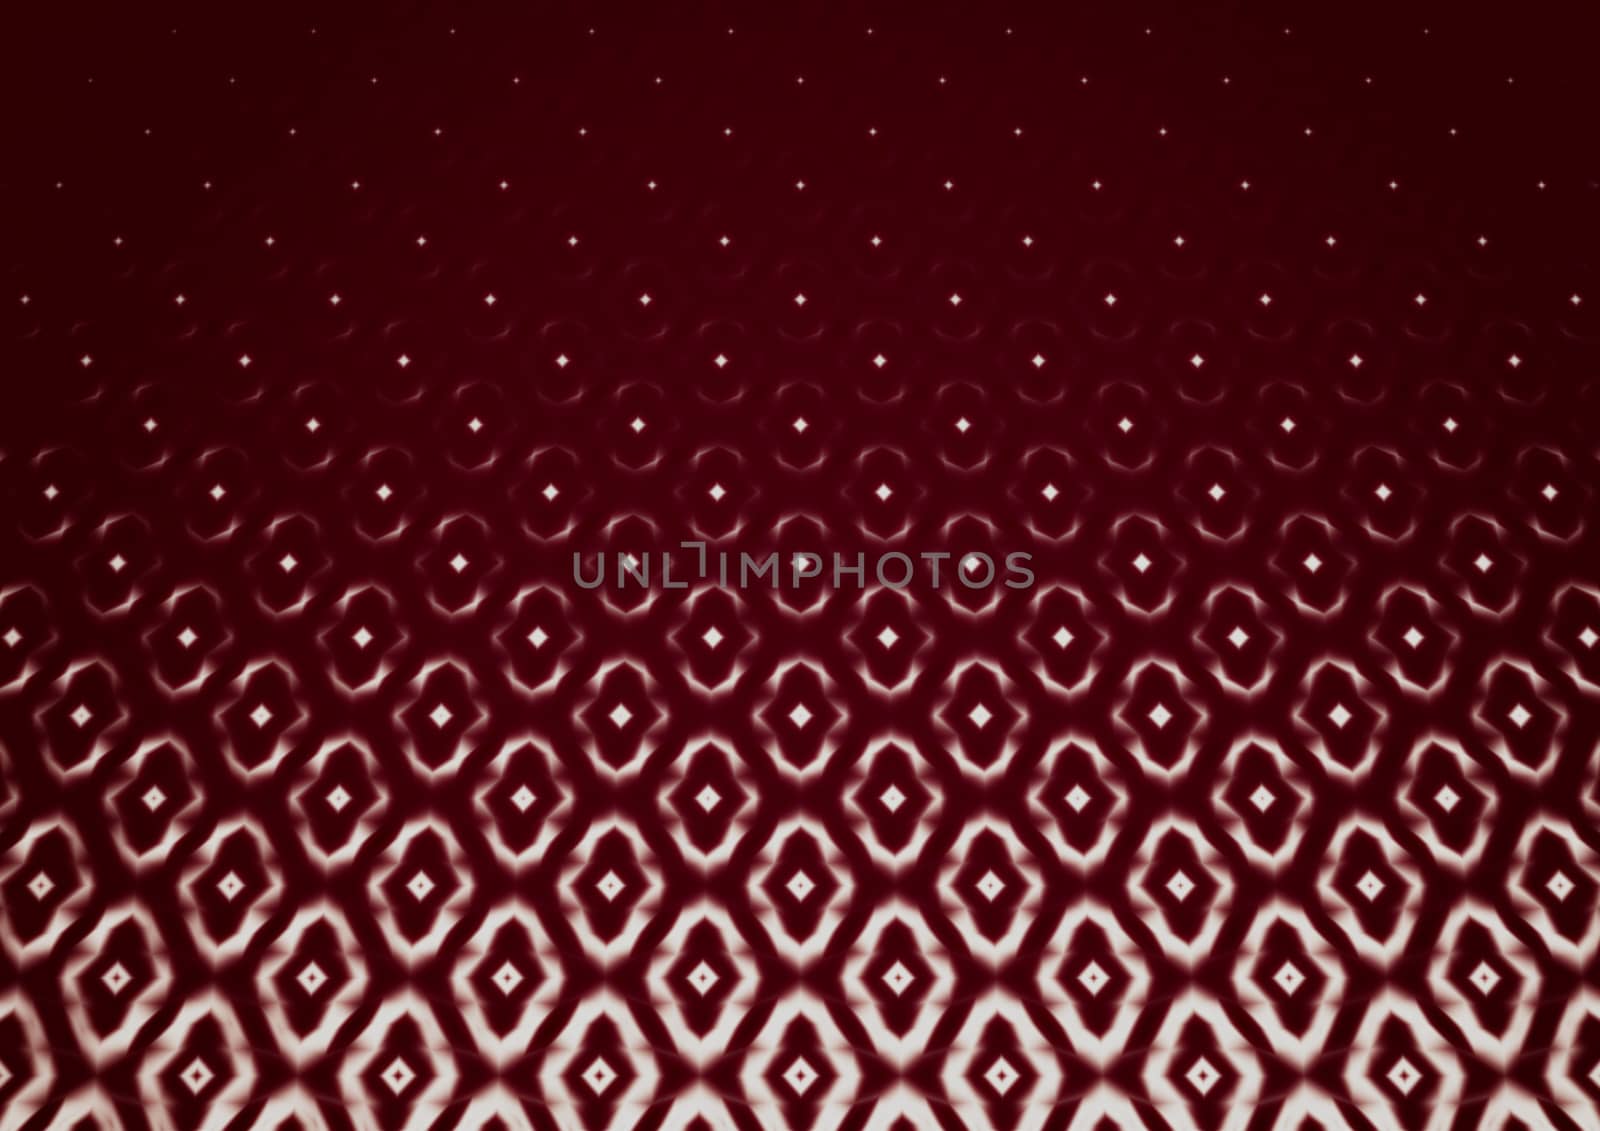 Abstract geometrical background 3d illustration or backdrop. 3D rendering.